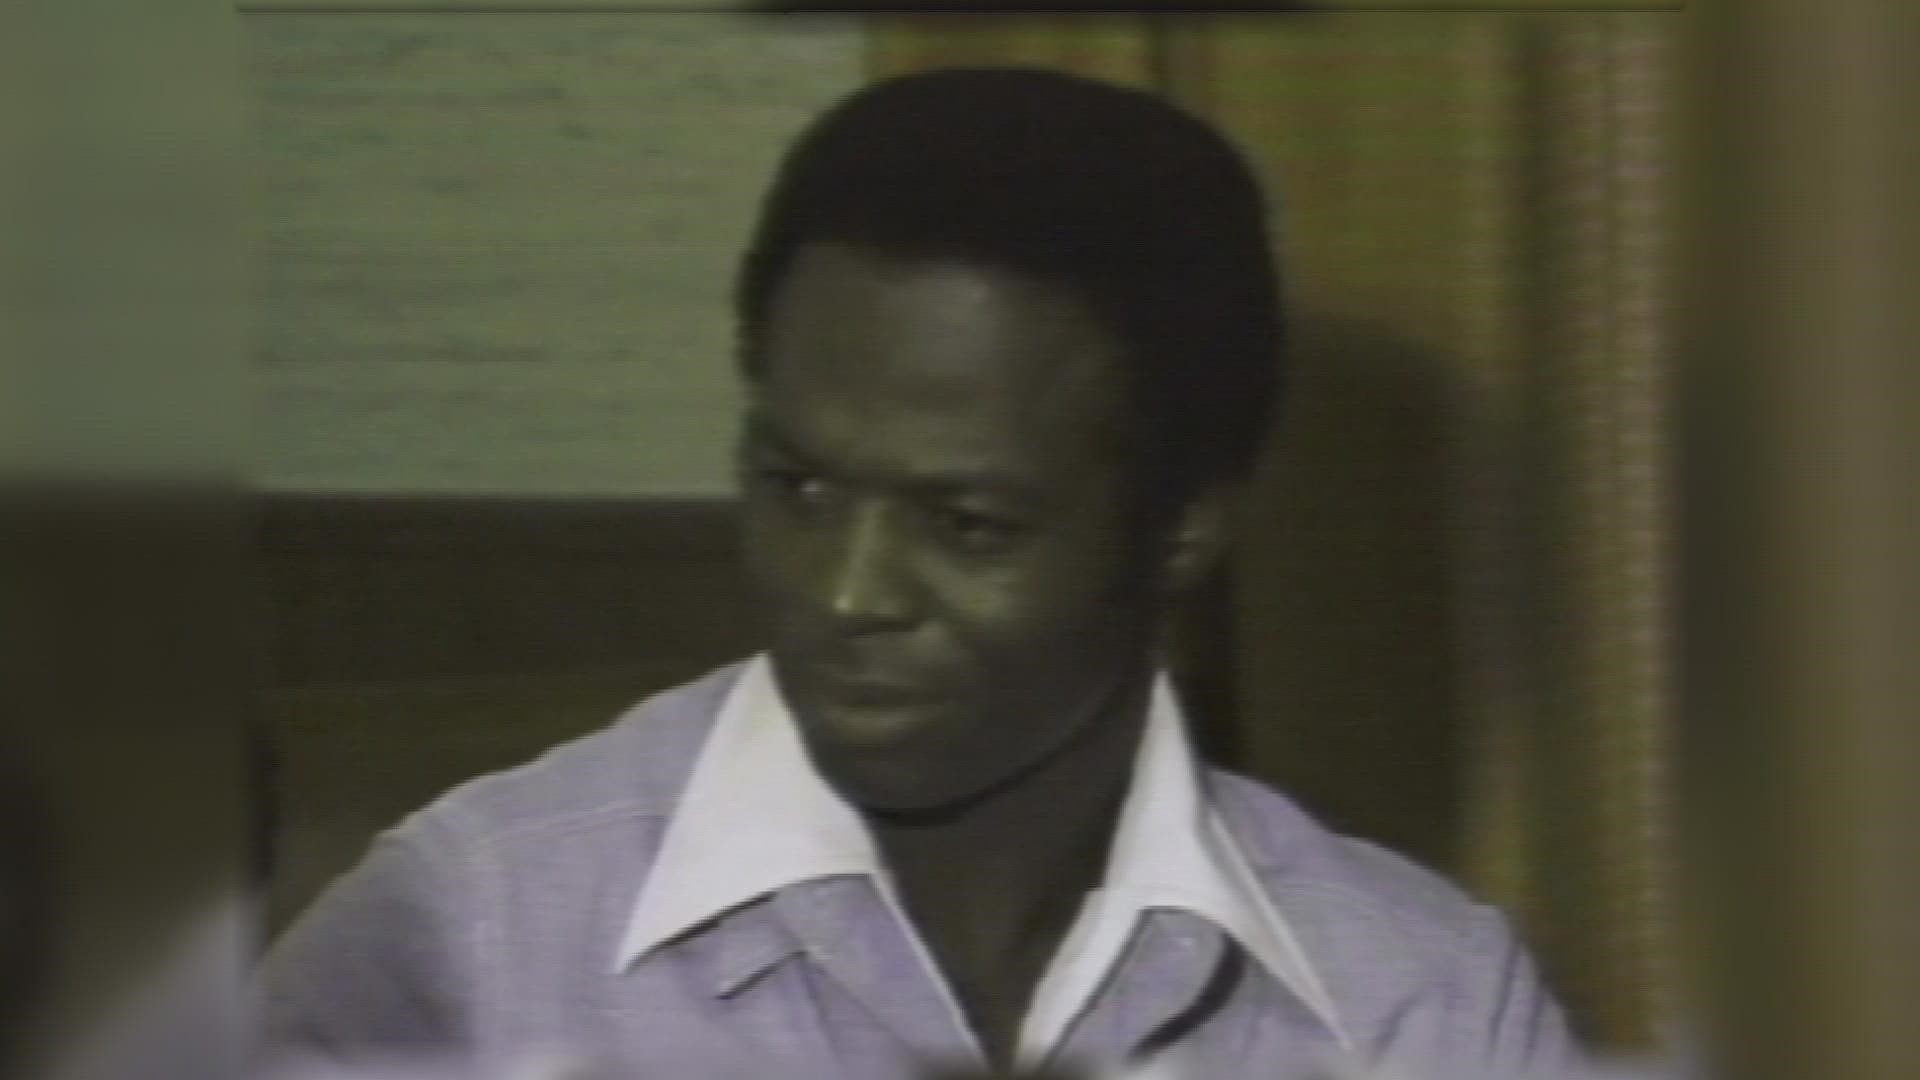 Hall of Famer and St. Louis Cardinals outfielder Lou Brock was a man of many talents – both on and off the field.